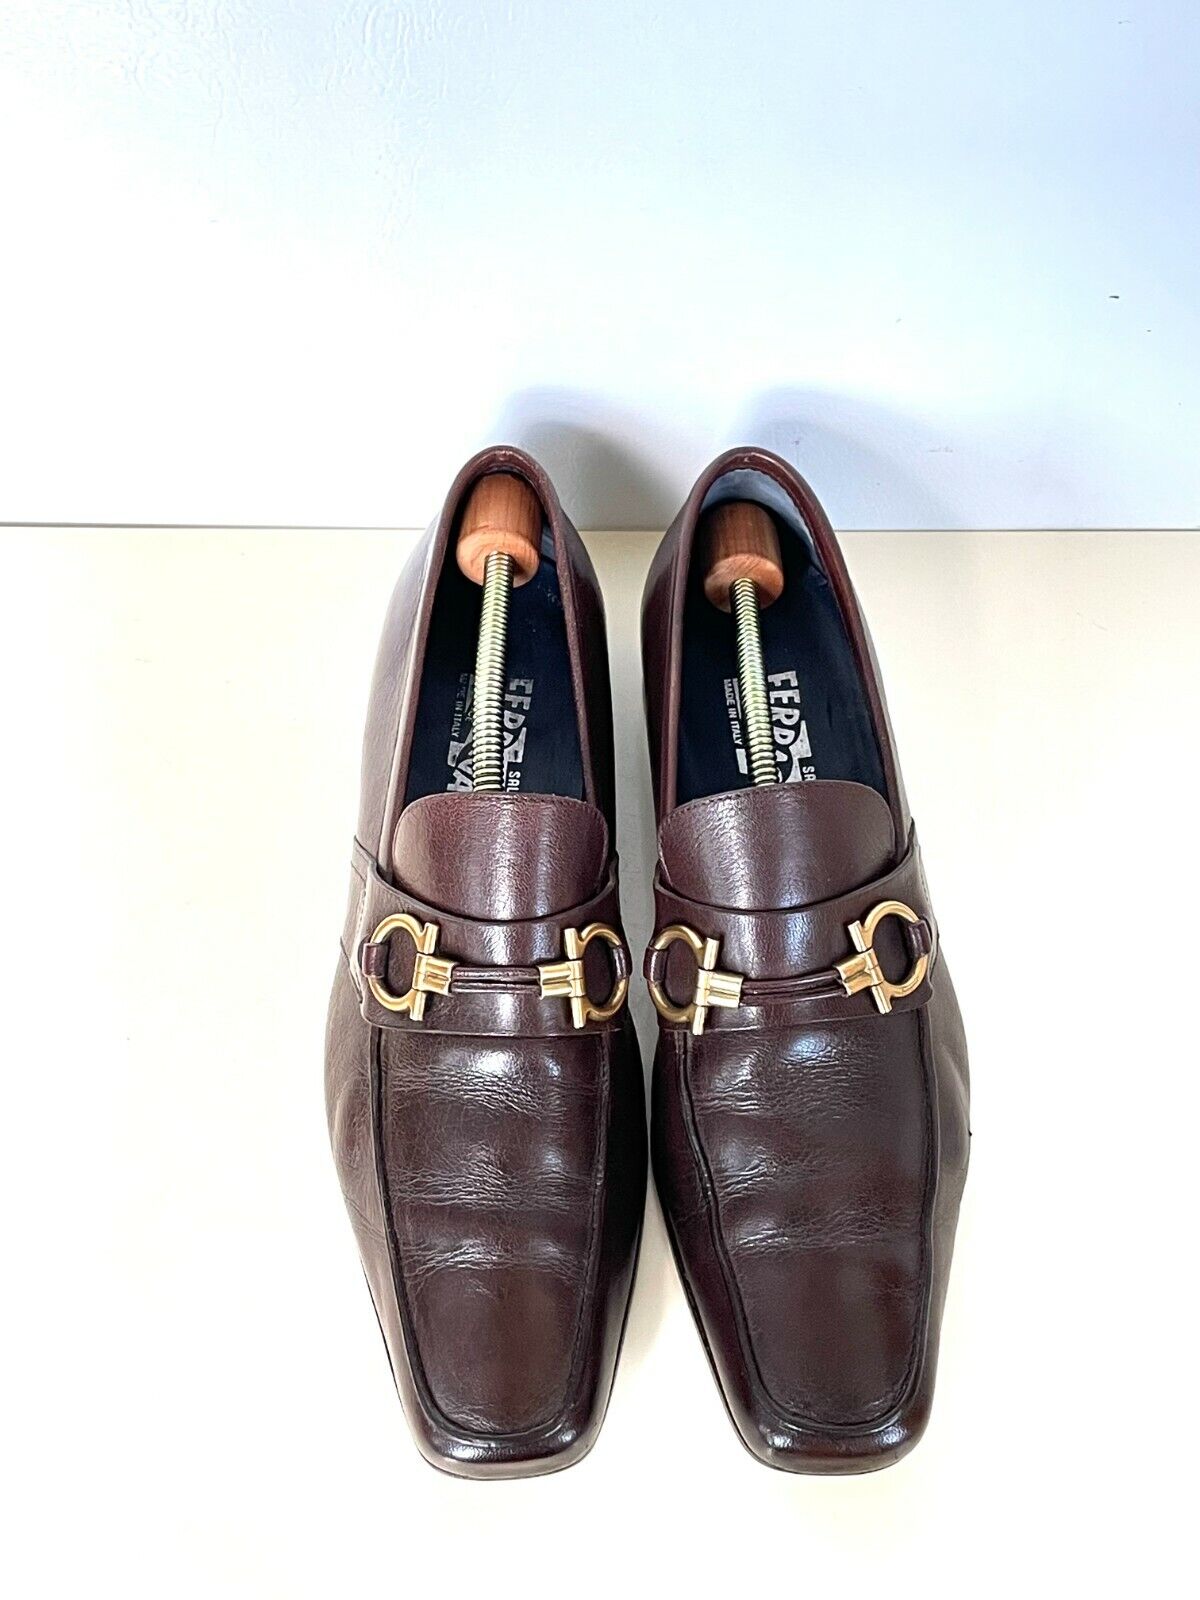 RARE SALVATORE FERRAGAMO BROWN LEATHER GANCINI LOAFERS SHOES SZ 8EE FULL STRAP